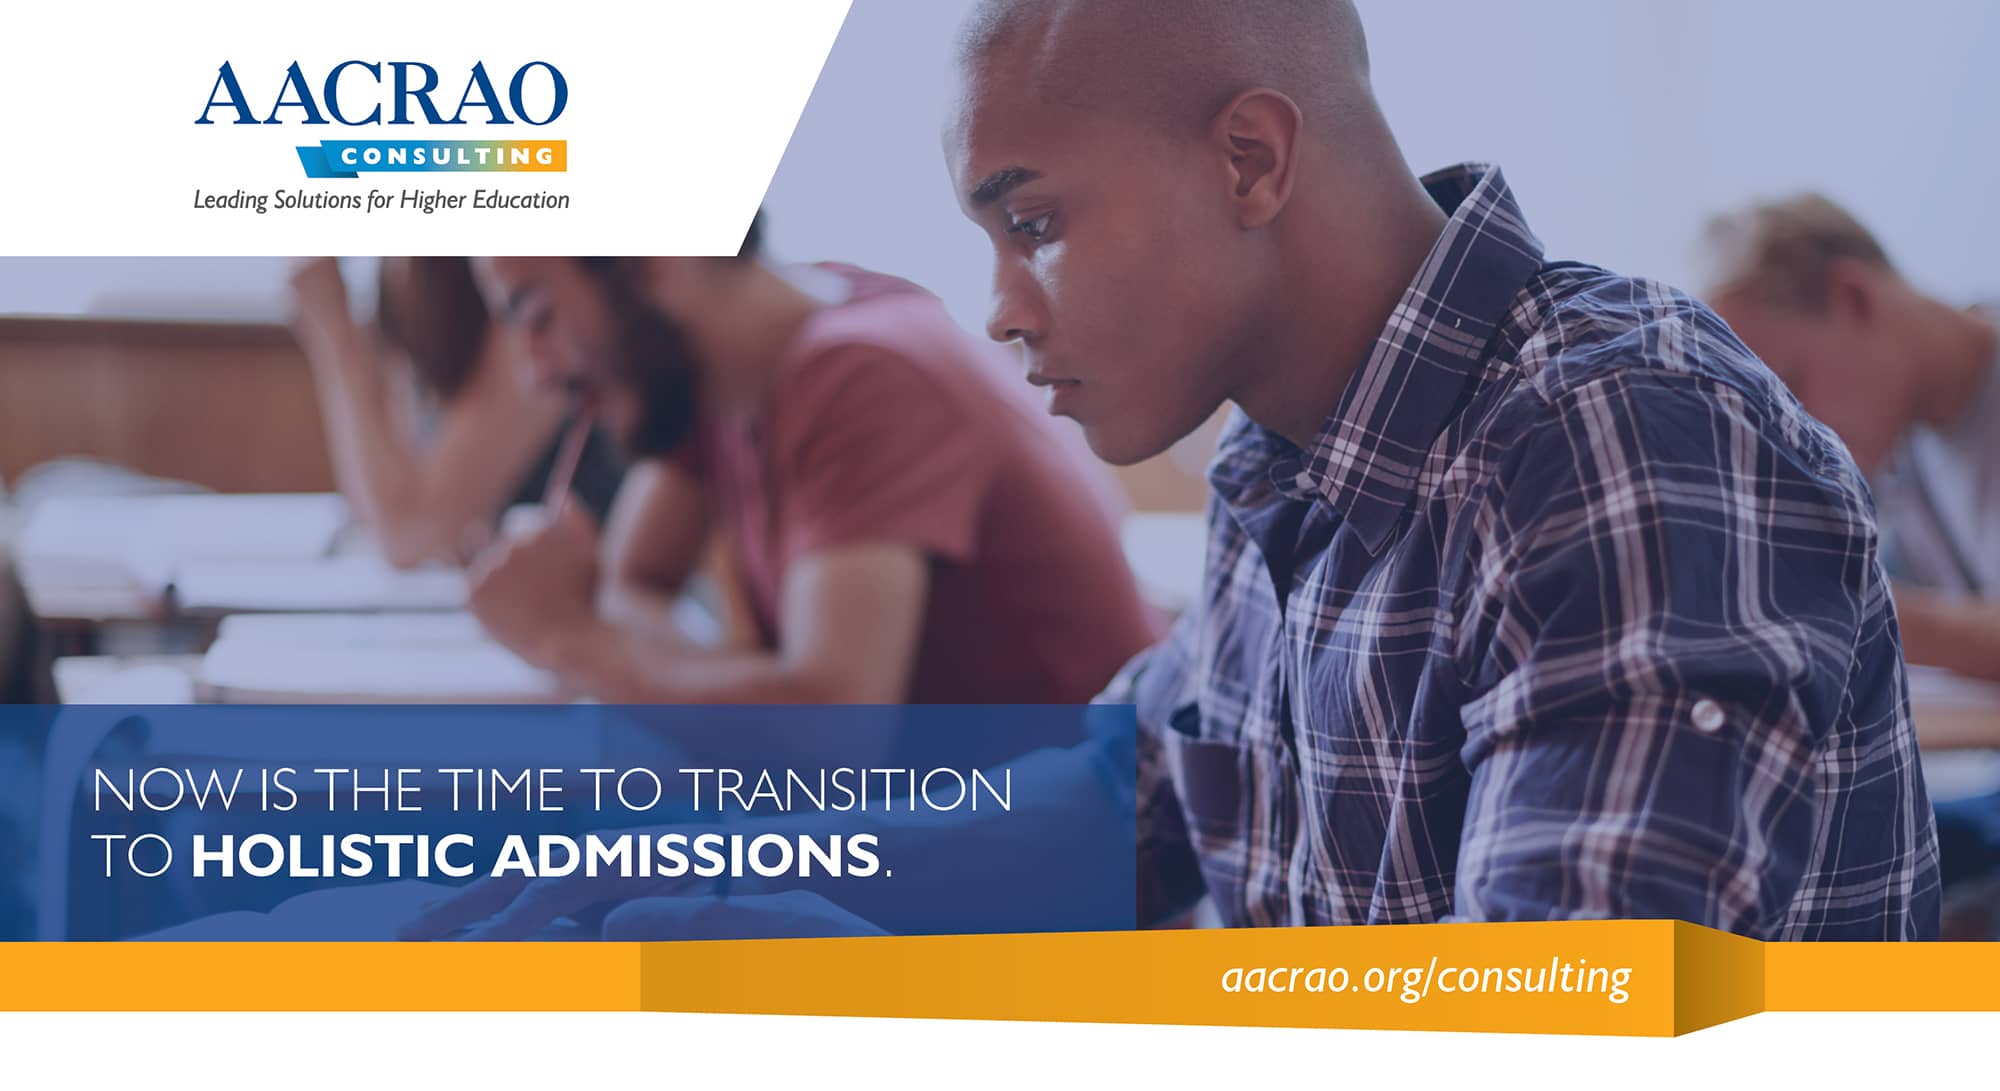 Student in the classroom, with headline: Now is the time to transition to holistic admissions.